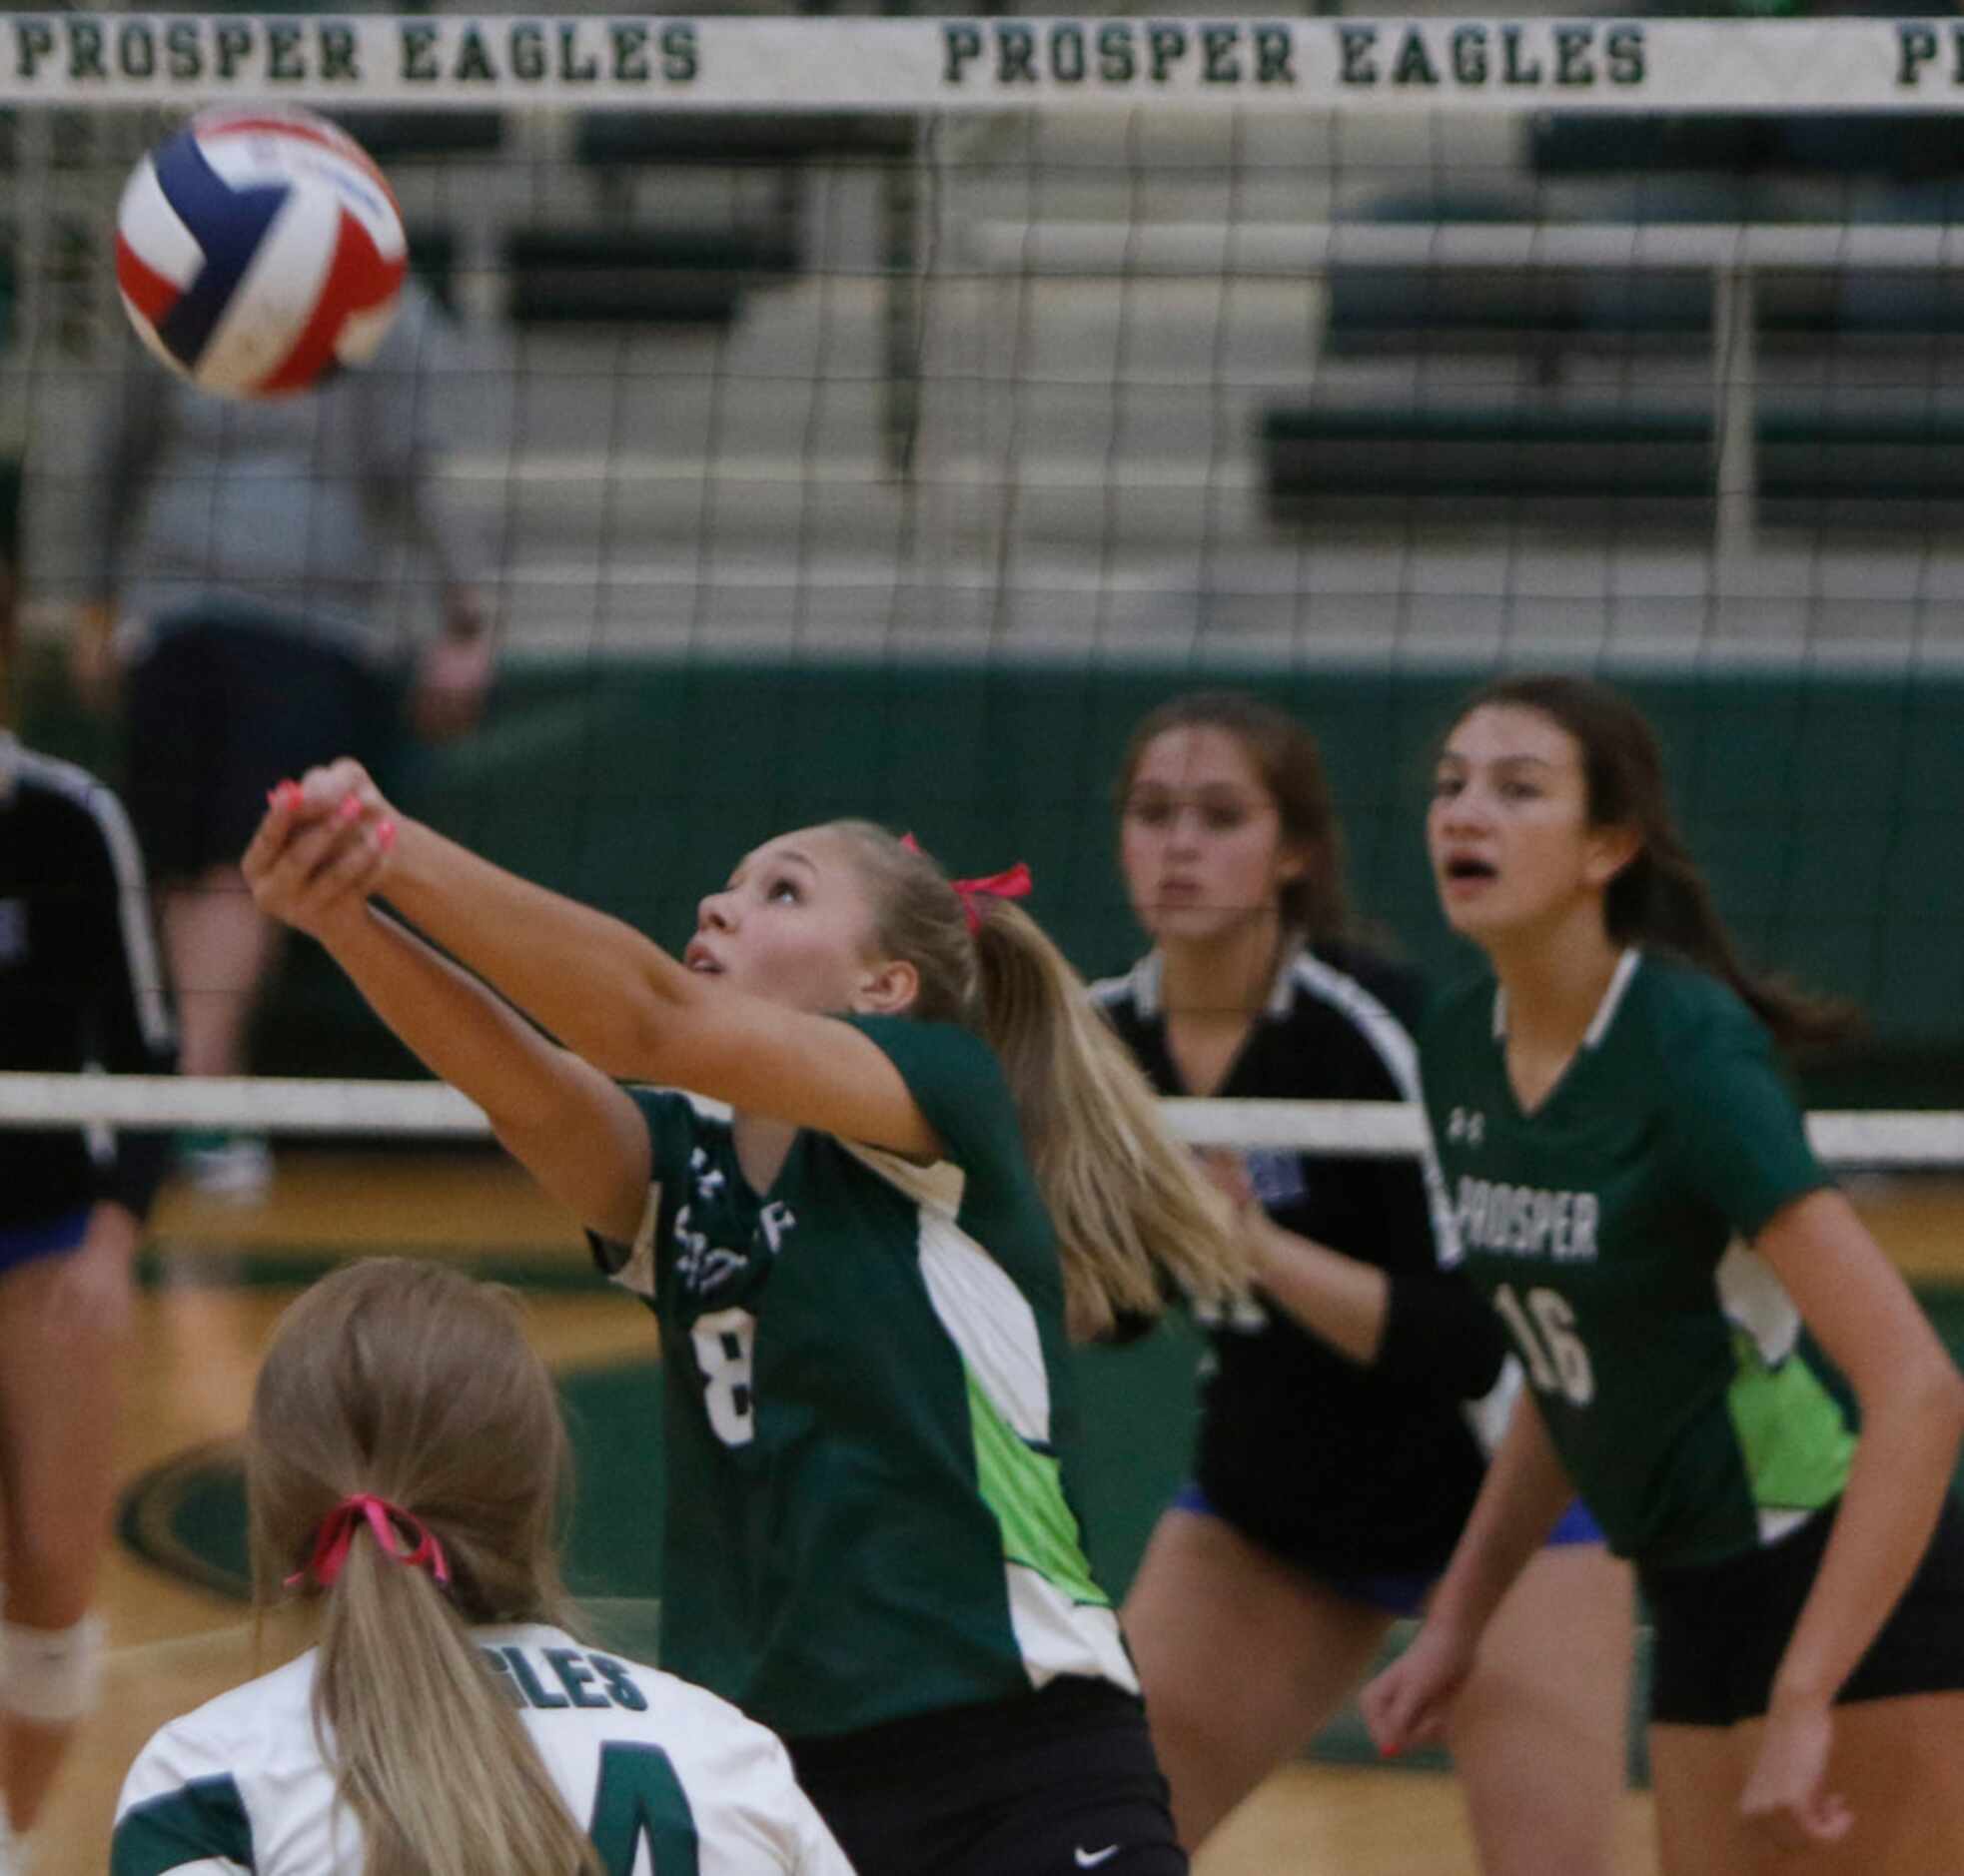 Prosper's Jazzlyn Ford (8) keeps the ball in play during the 2nd game of their match against...